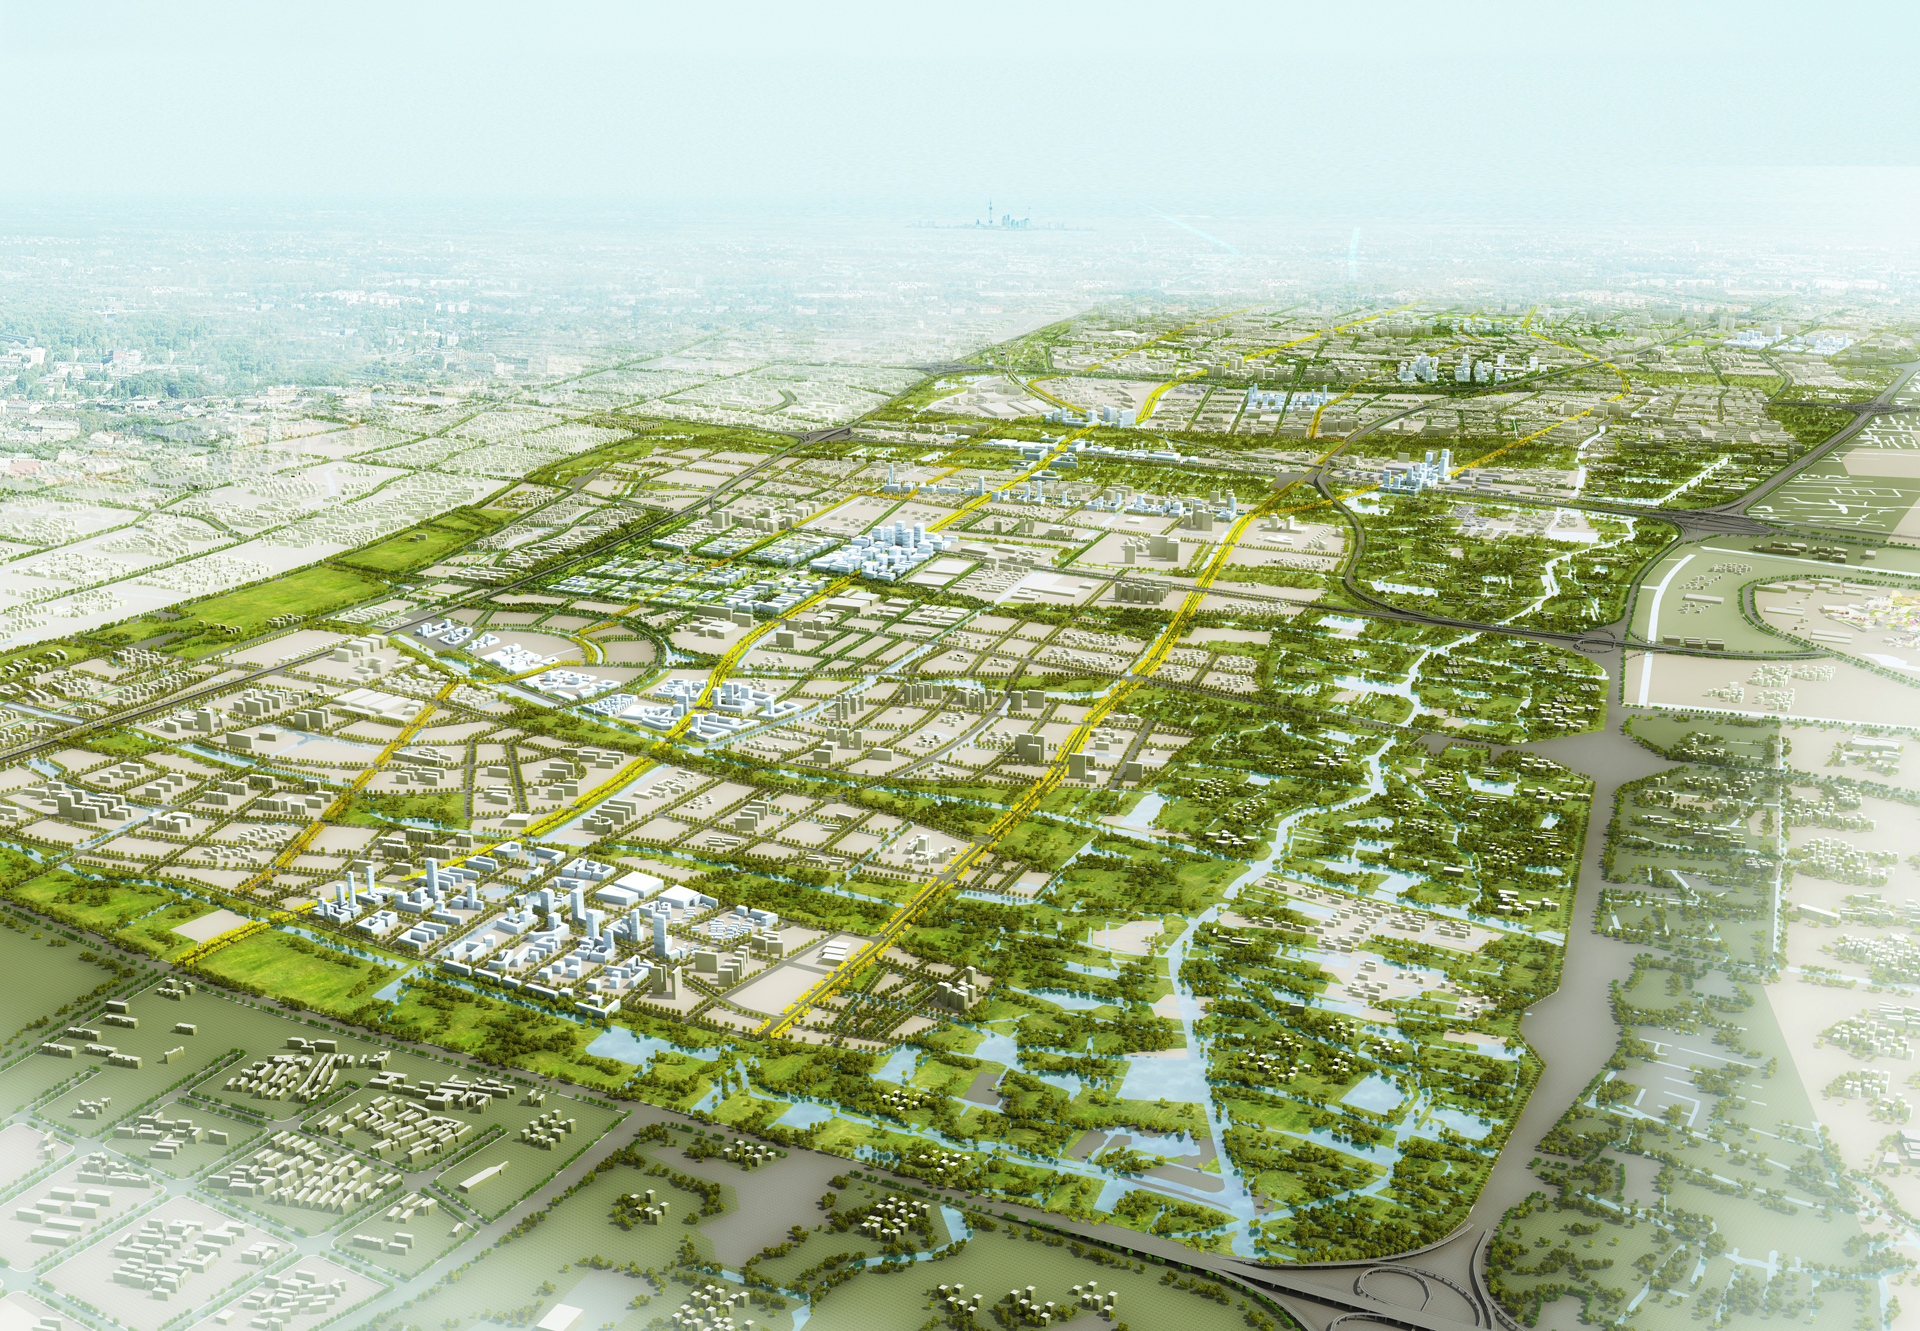 Zhangjiang Science and Technology City